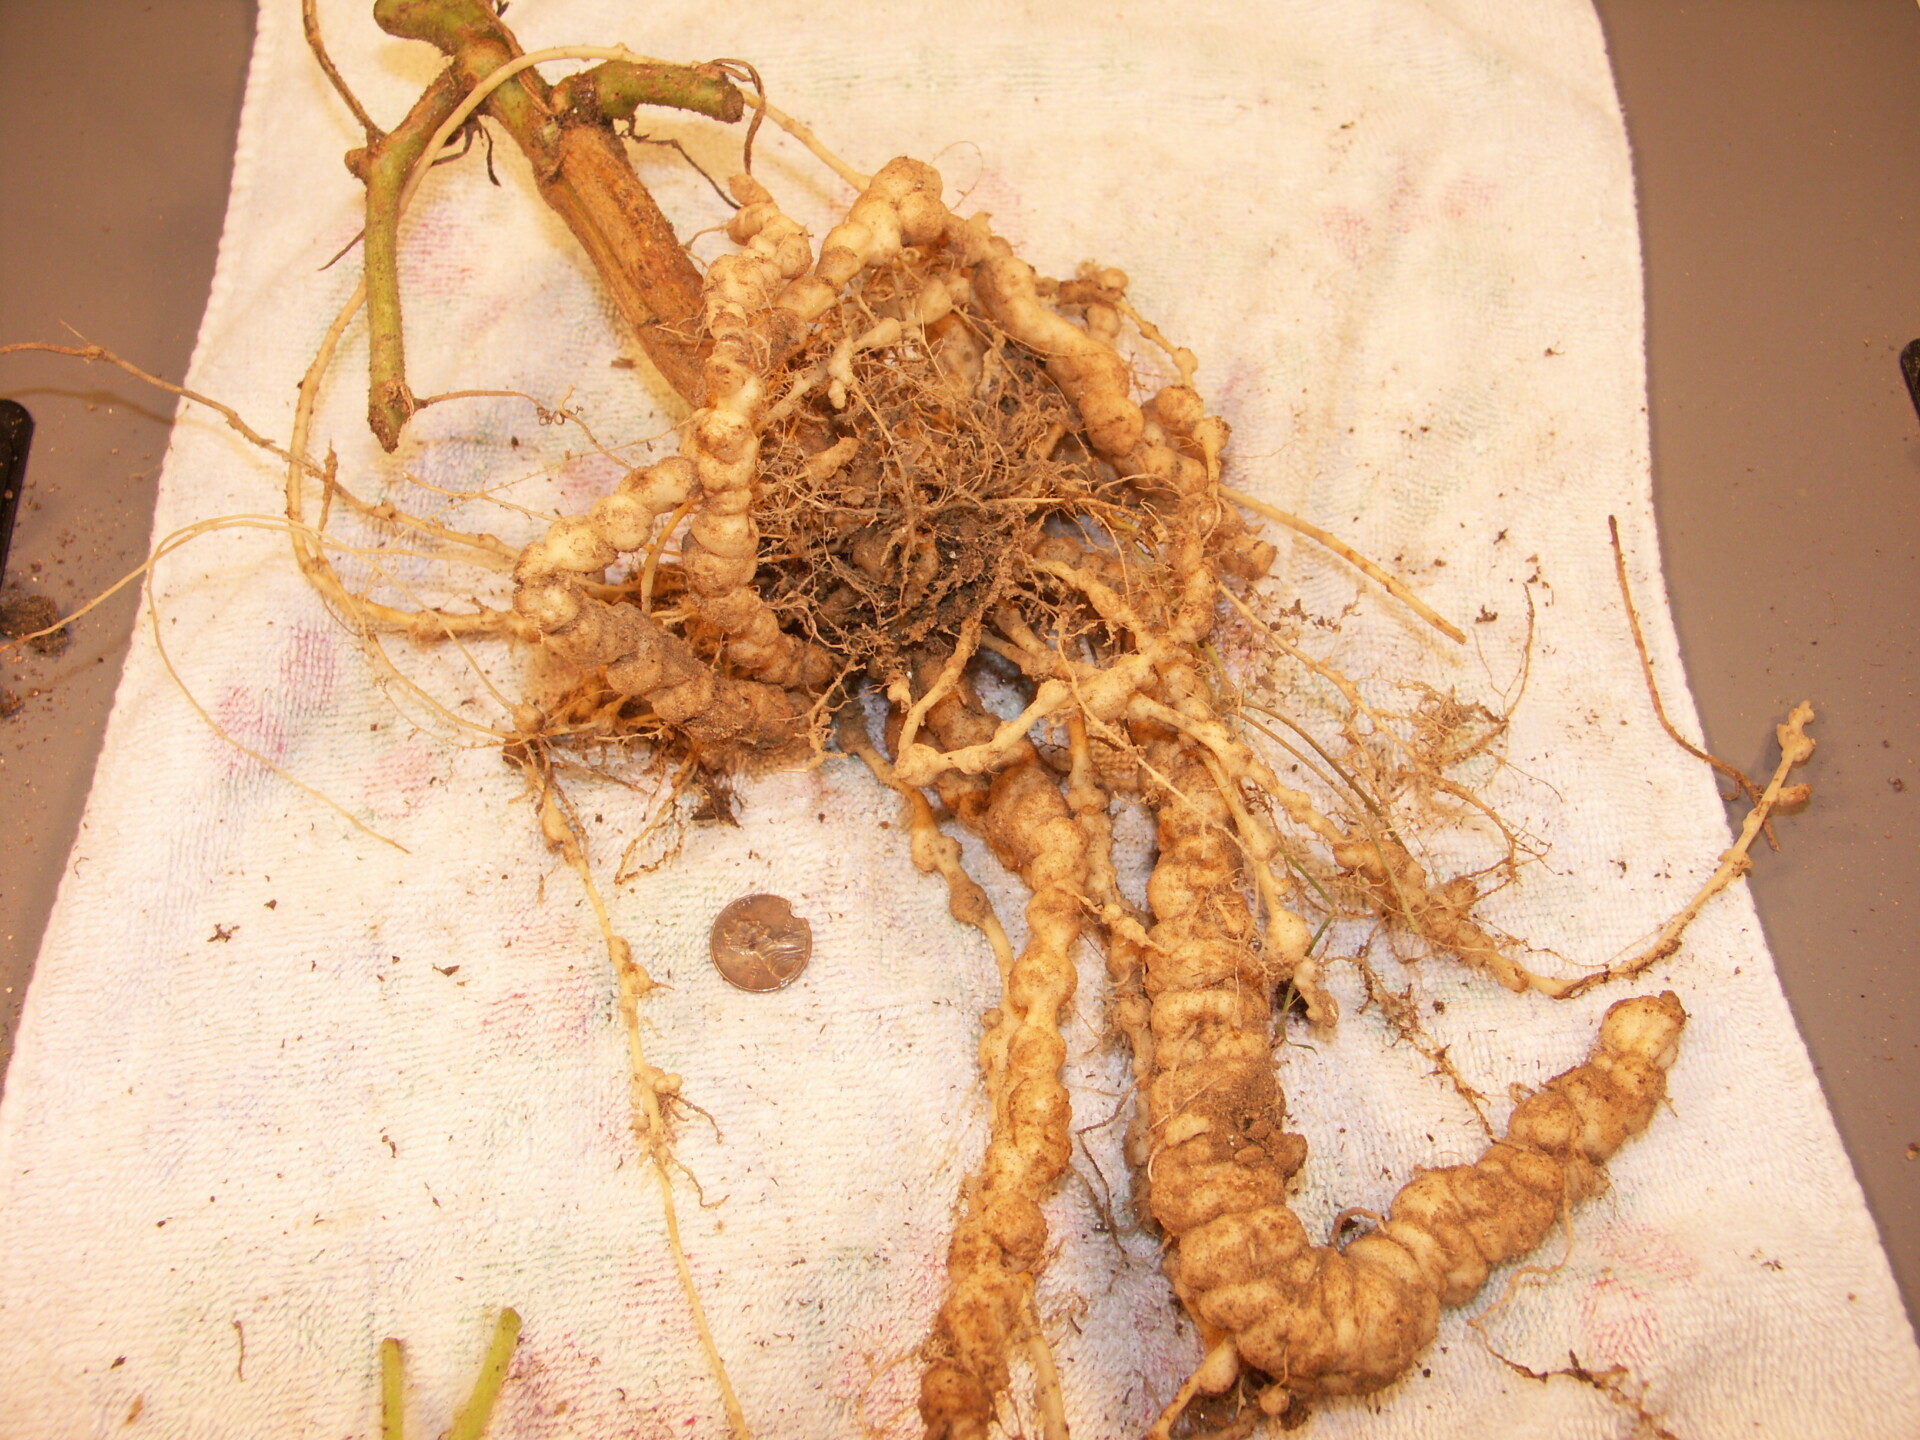 Figure 6. Severe root knot nematode galls on watermelon roots.